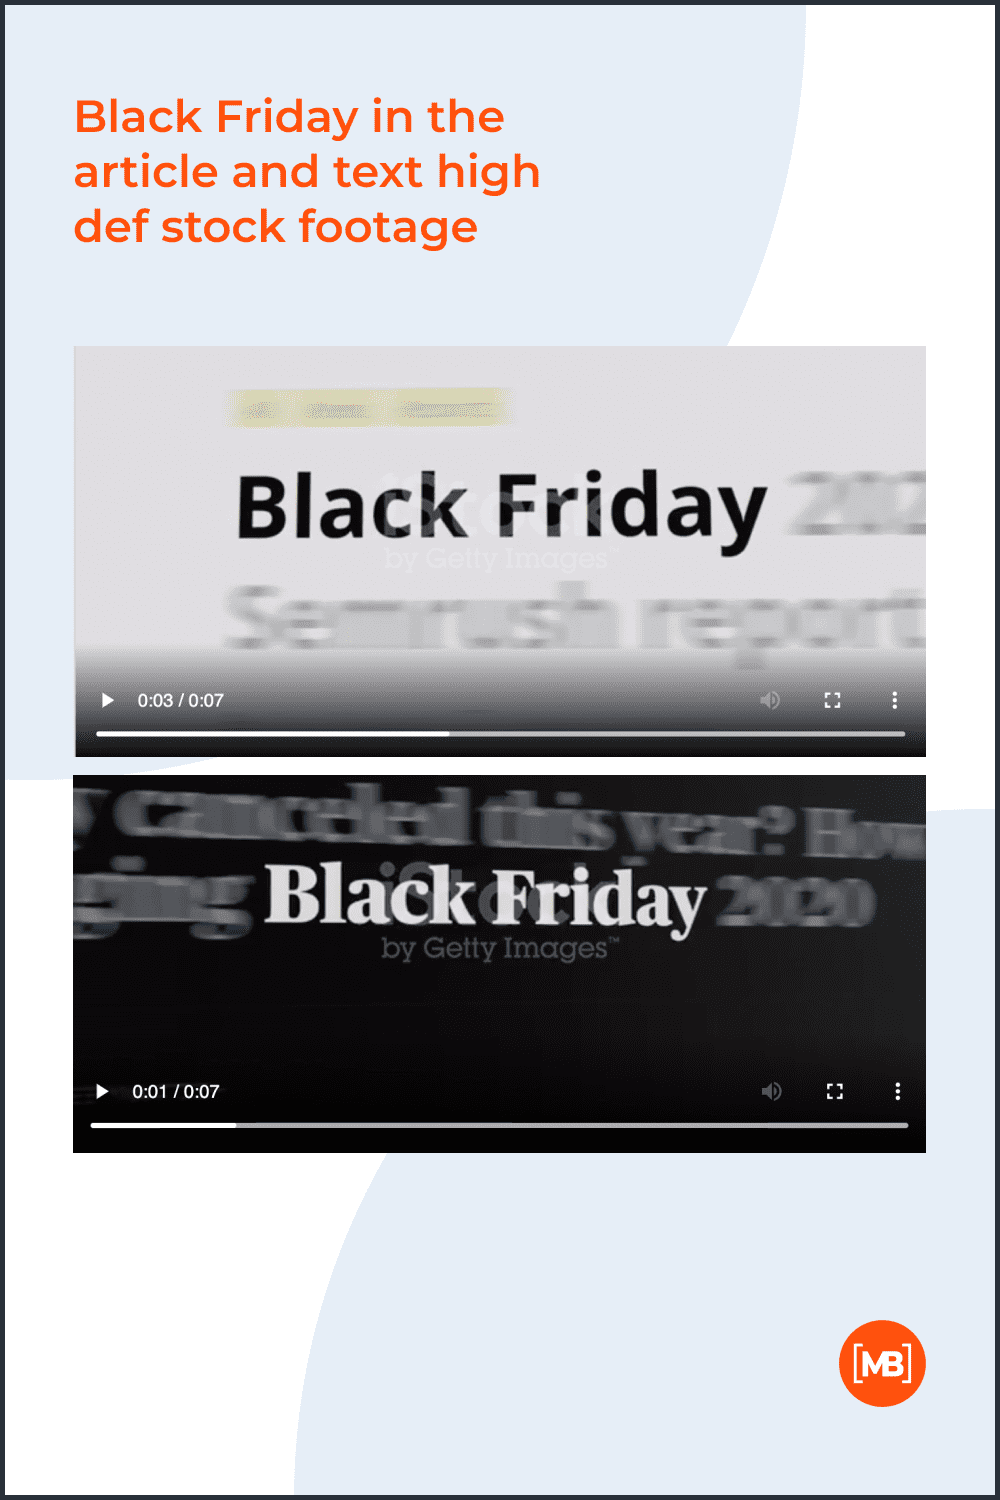 Black Friday in the article and text high def stock footage.